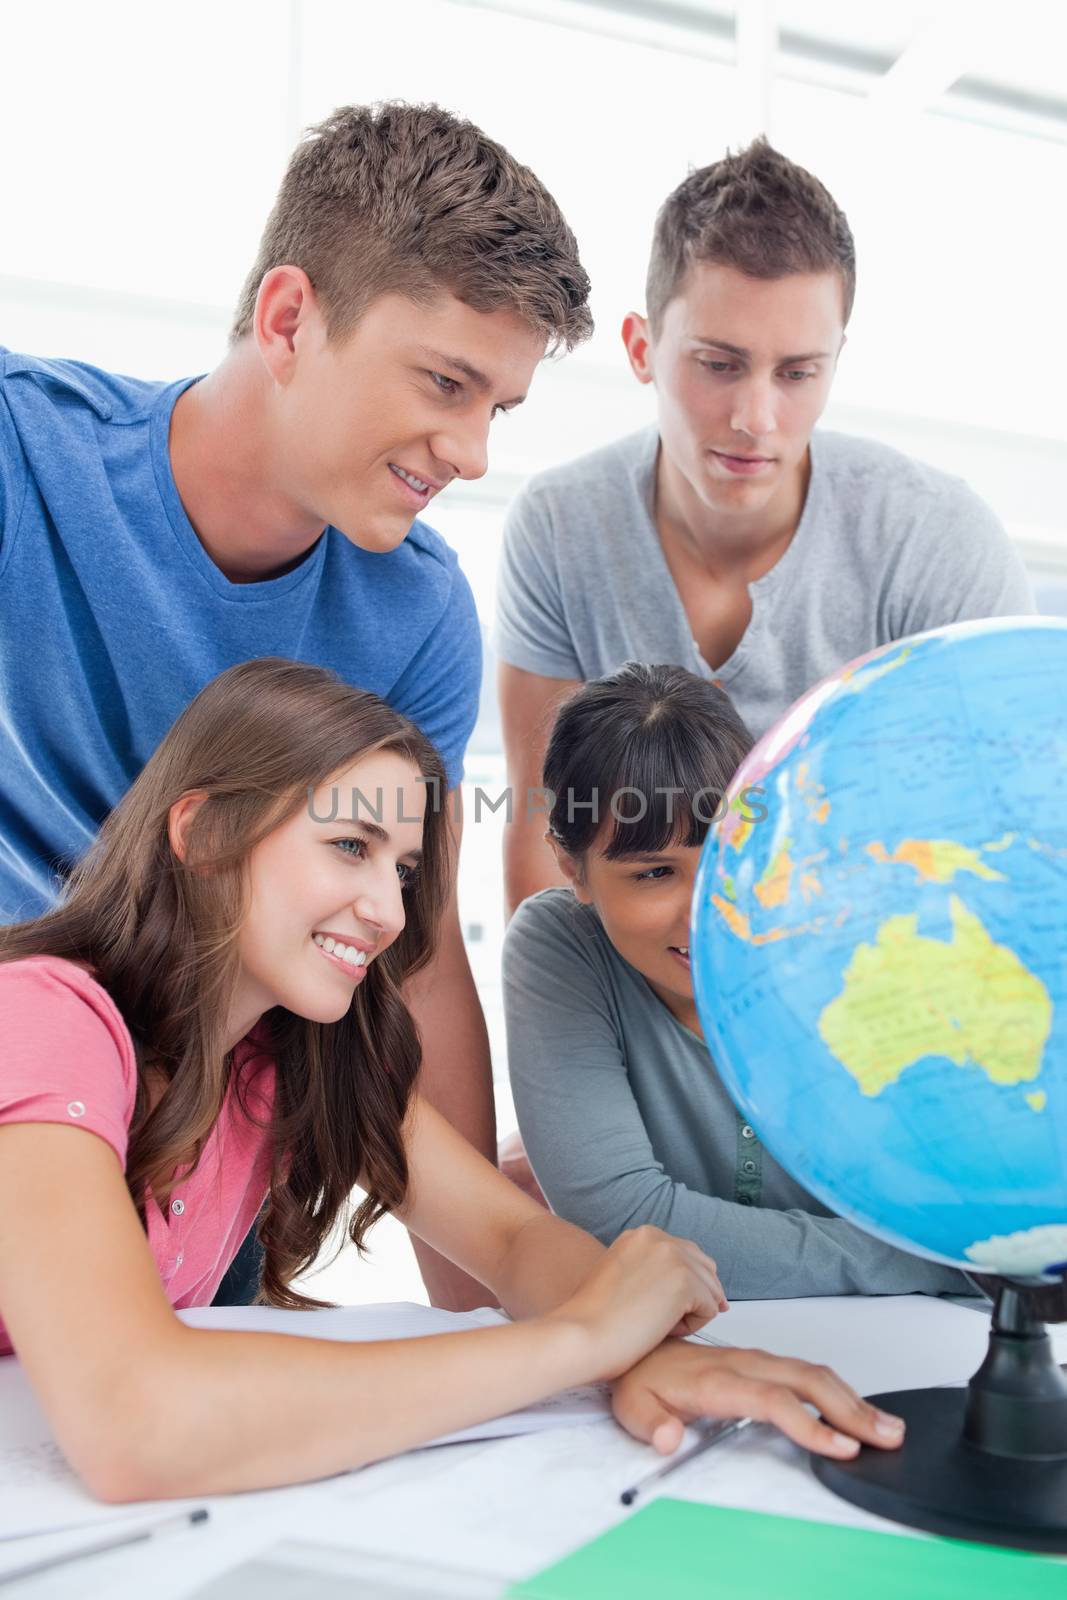 A close up shot of people looking at the globe in front of them